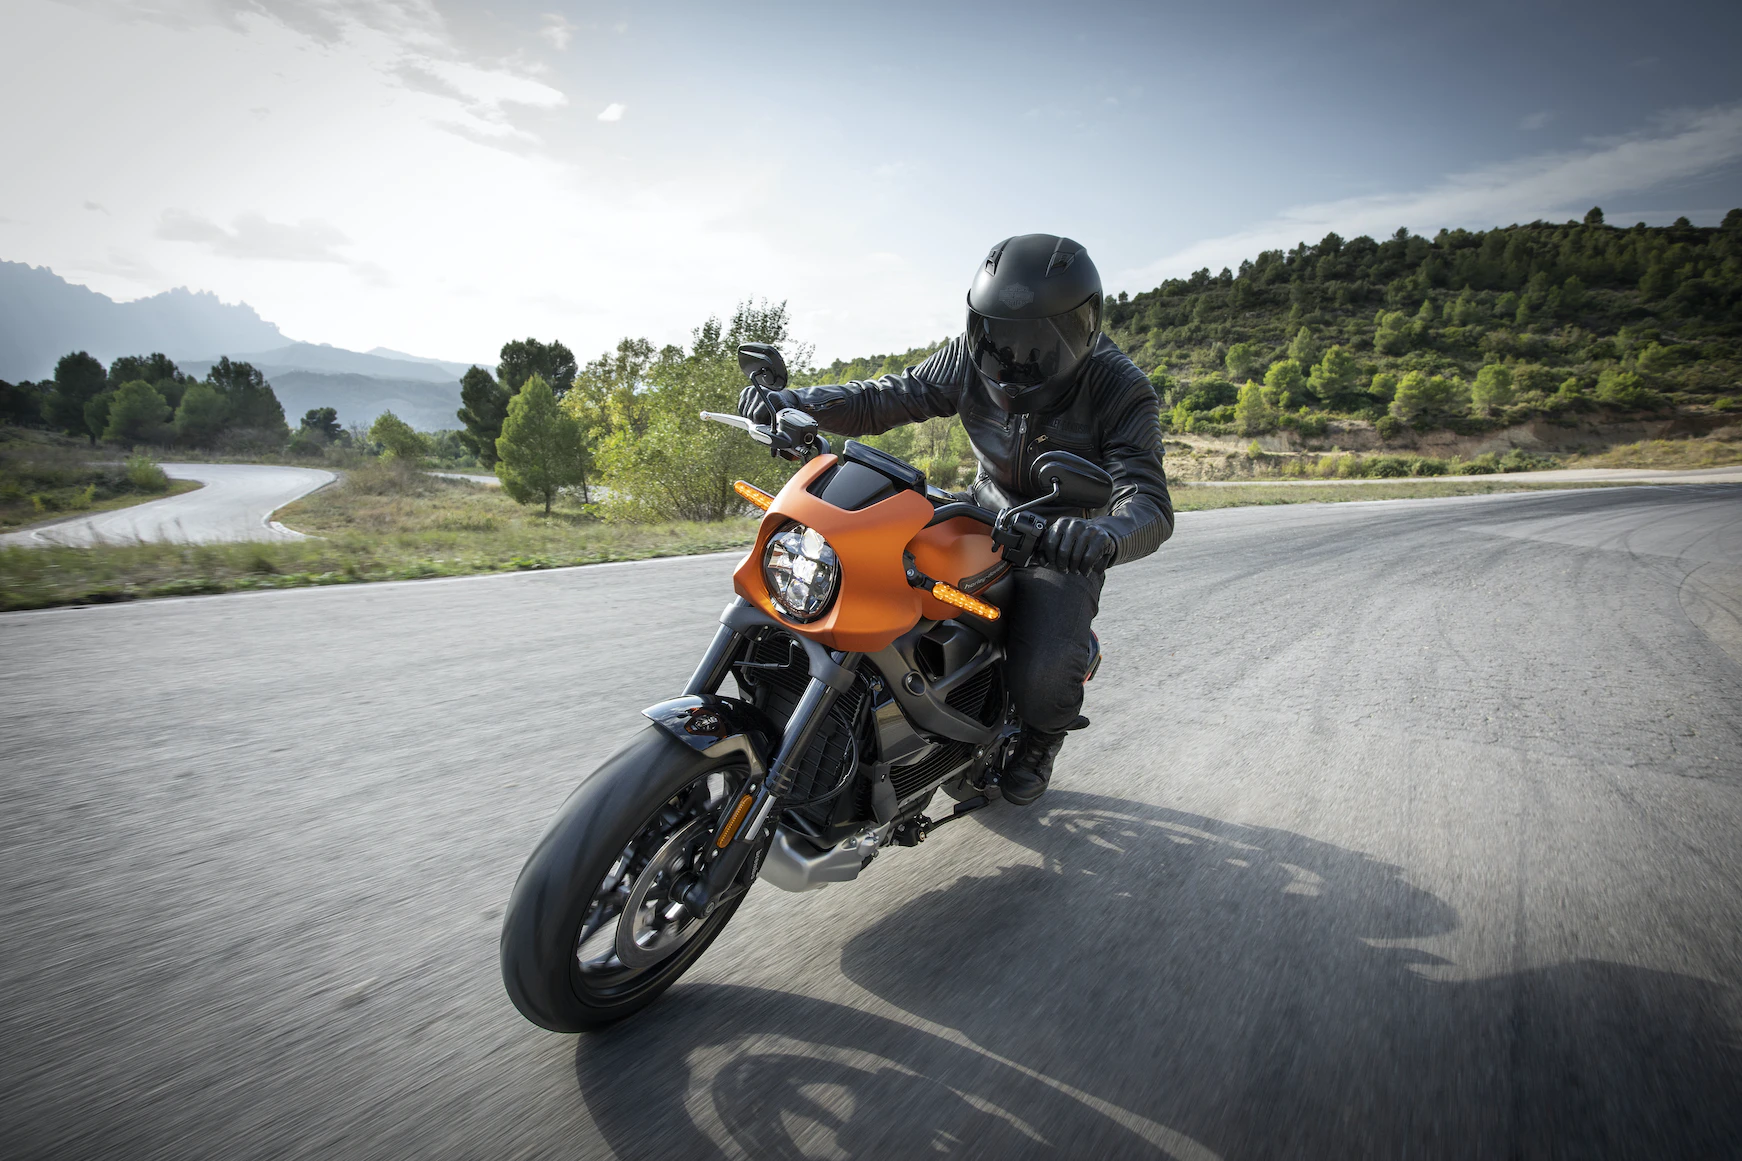 What You Need to Know About Motorcycle Helmet Laws in Tennessee